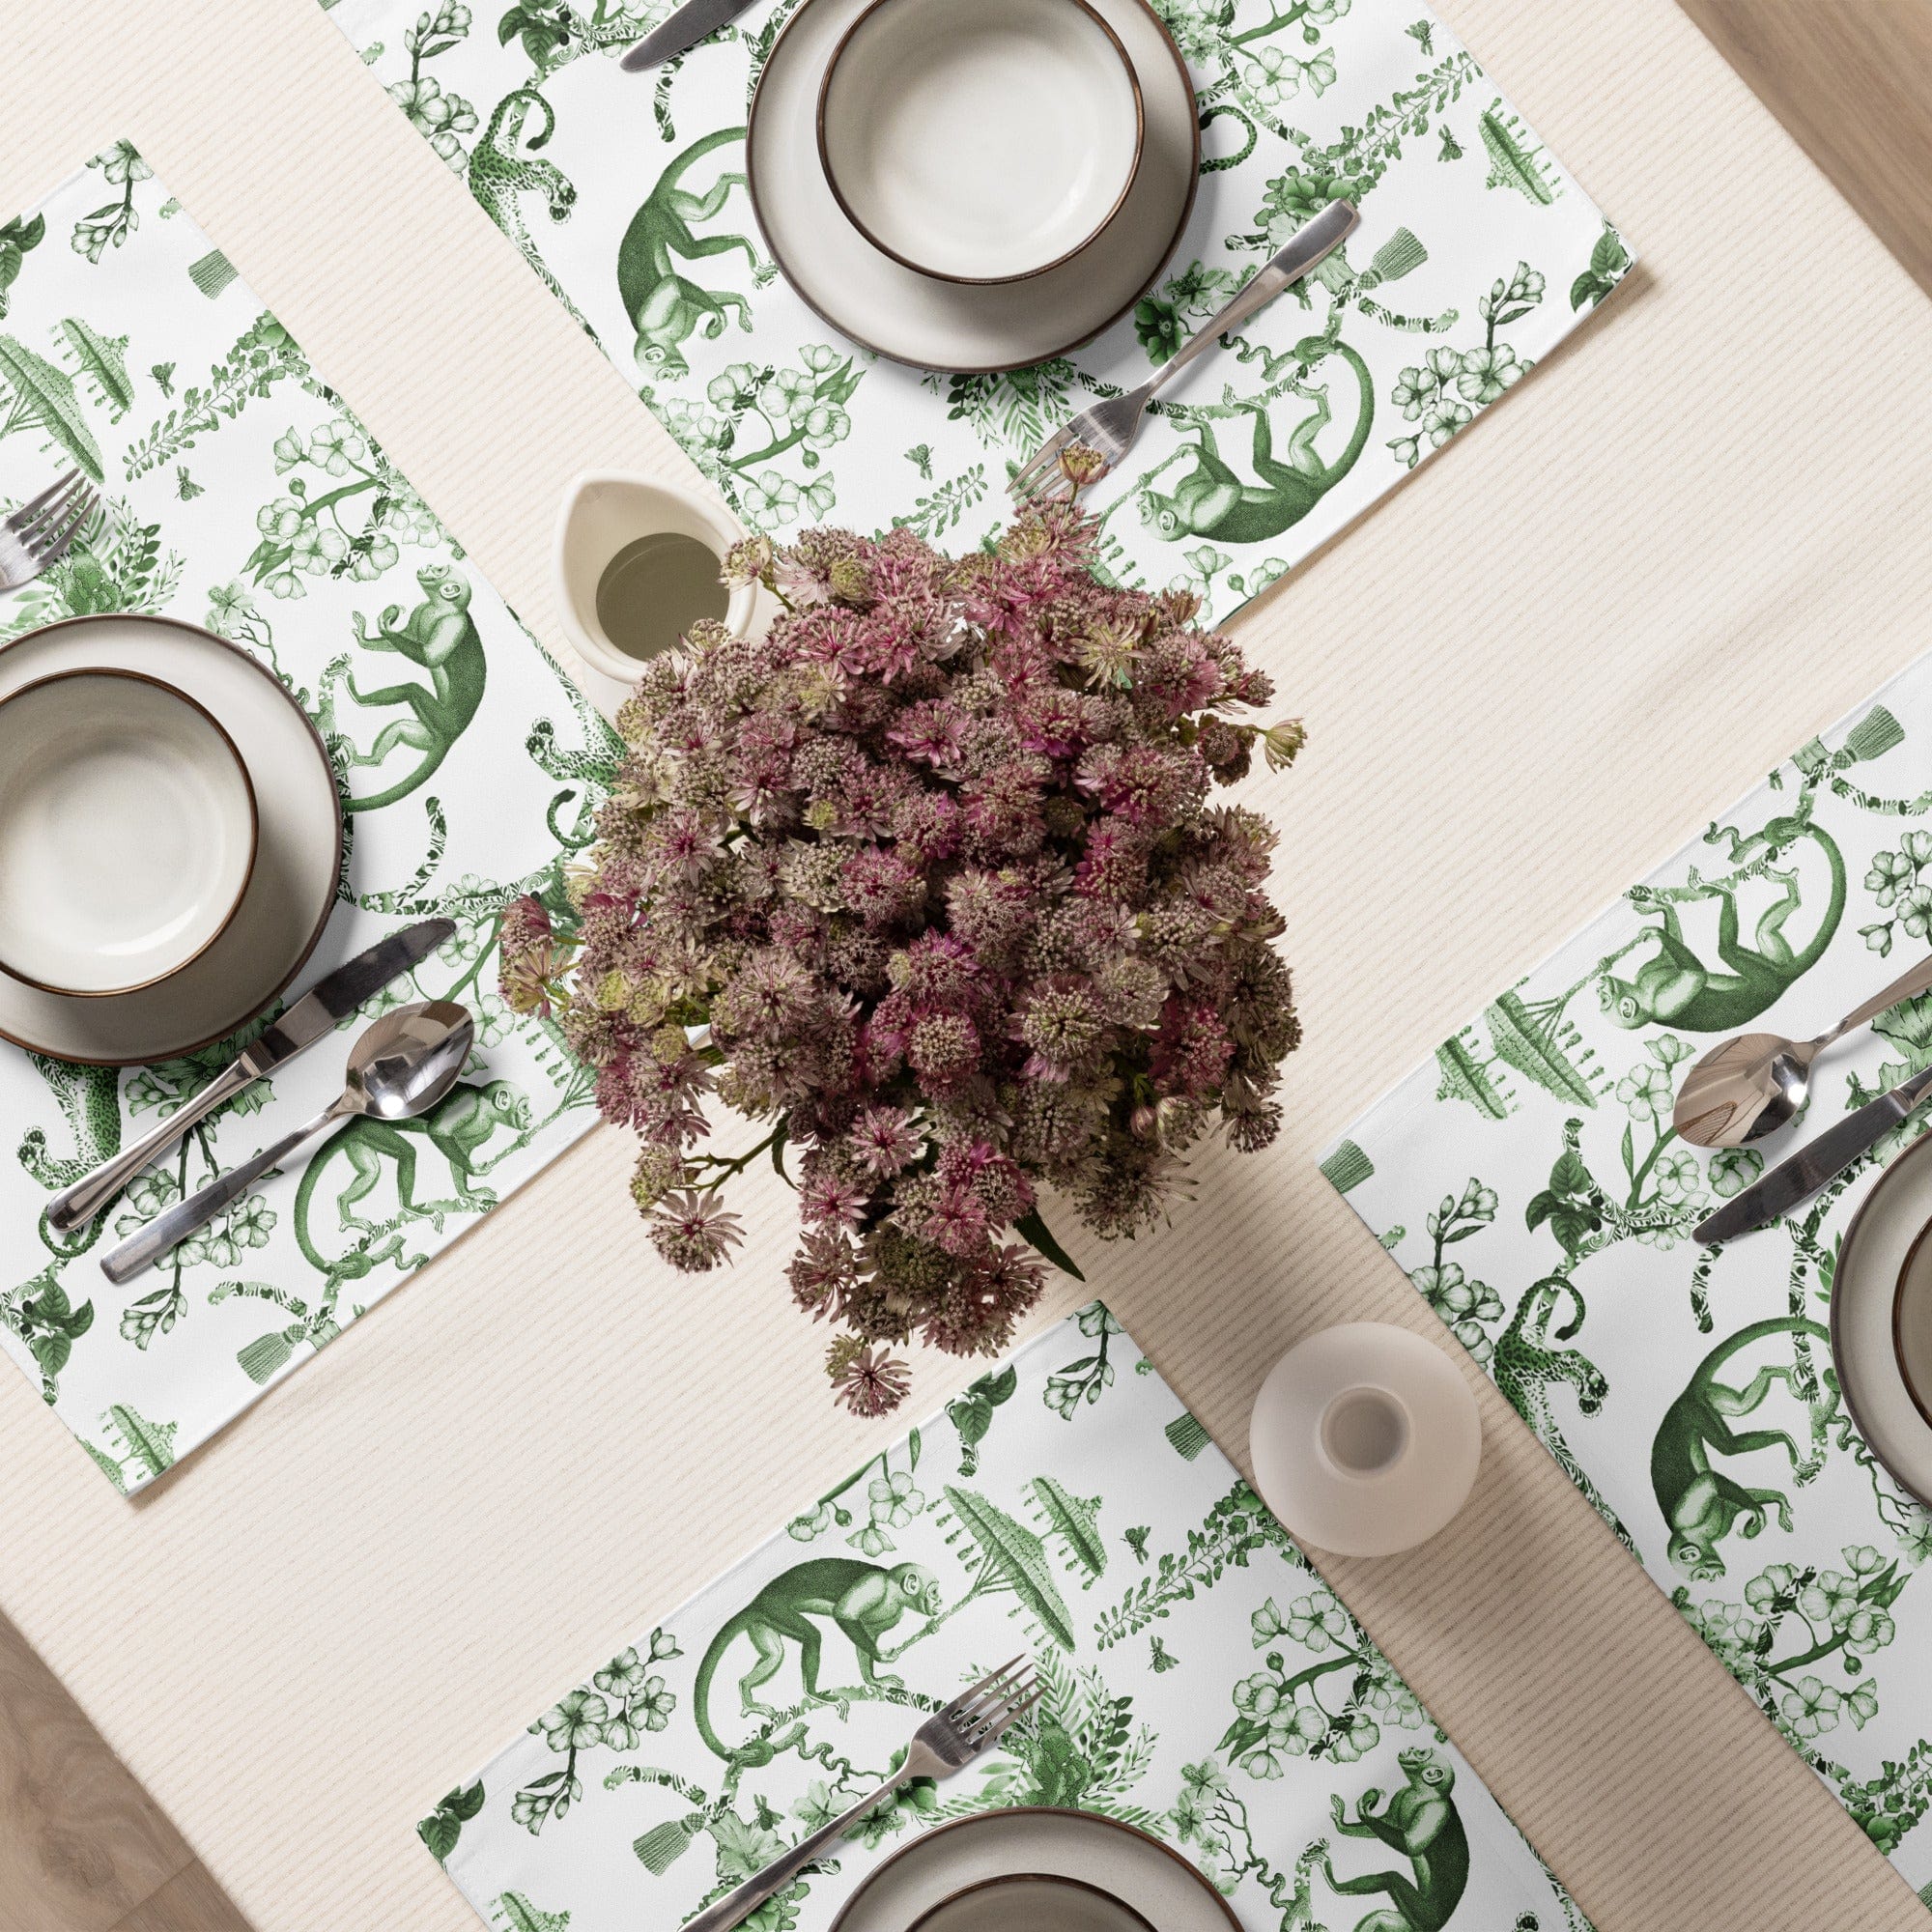 Kate McEnroe New York Set of 4 Chinoiserie Placemats, Floral Green, White Chinoiserie Jungle Table Linen, Country Farmhouse Botanical Toile Table Decor Placemats 8608700_17484